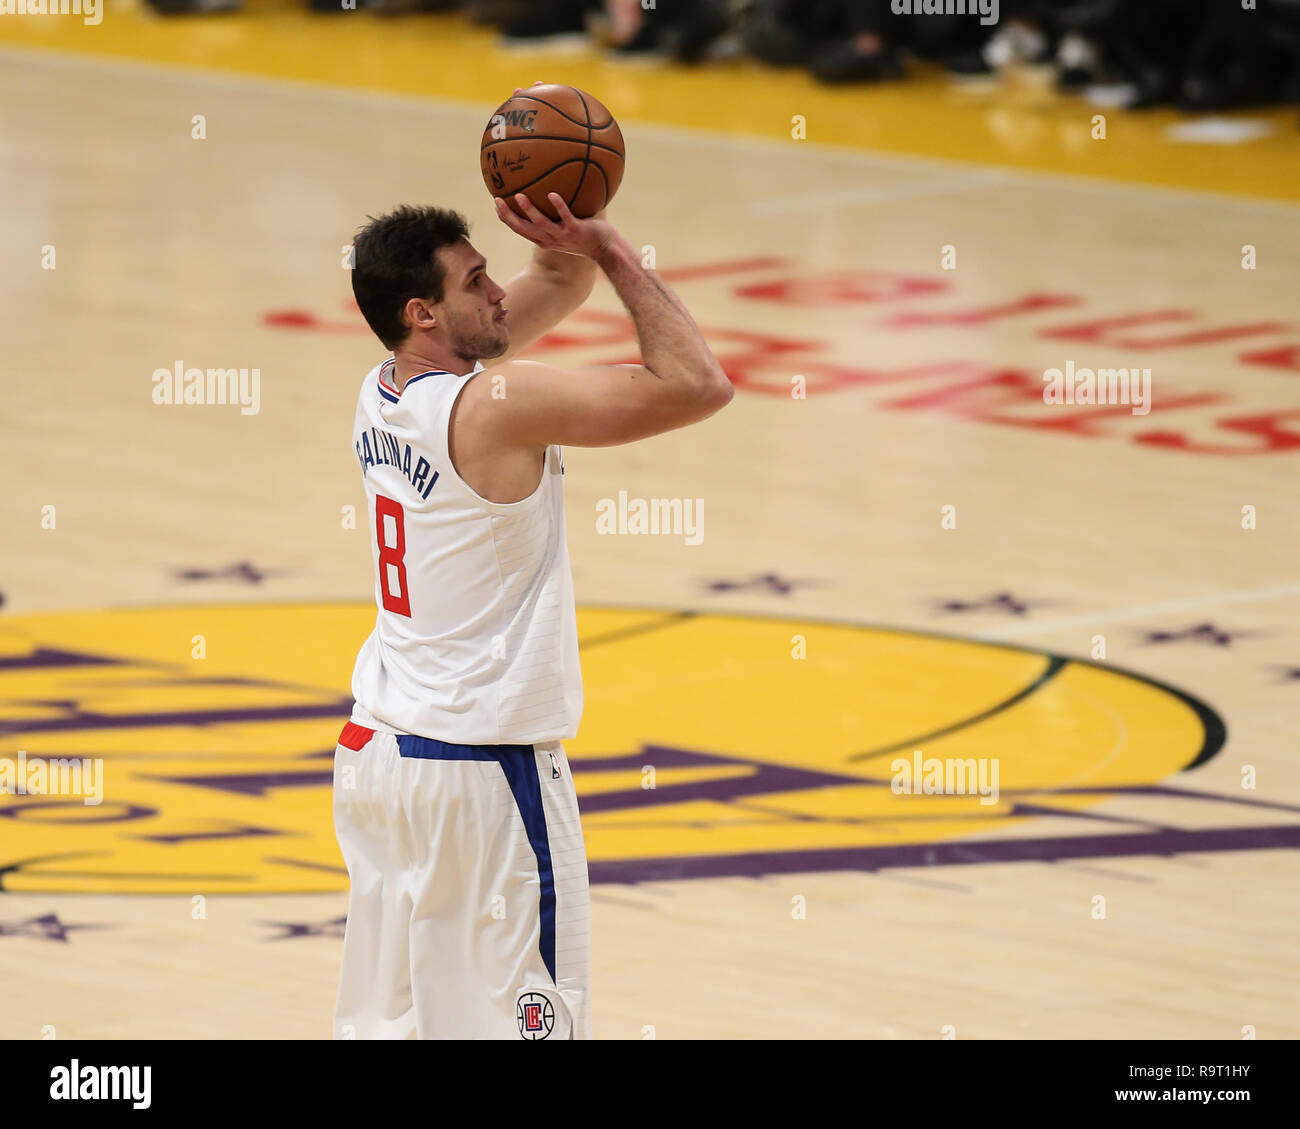 Los Angeles, CA, USA. 28th Dec, 2018. LA Clippers forward Danilo Gallinari #8 during the Los Angeles Clippers vs Los Angeles Lakers at Staples Center on December 28, 2018. (Photo by Jevone Moore) Credit: csm/Alamy Live News Stock Photo